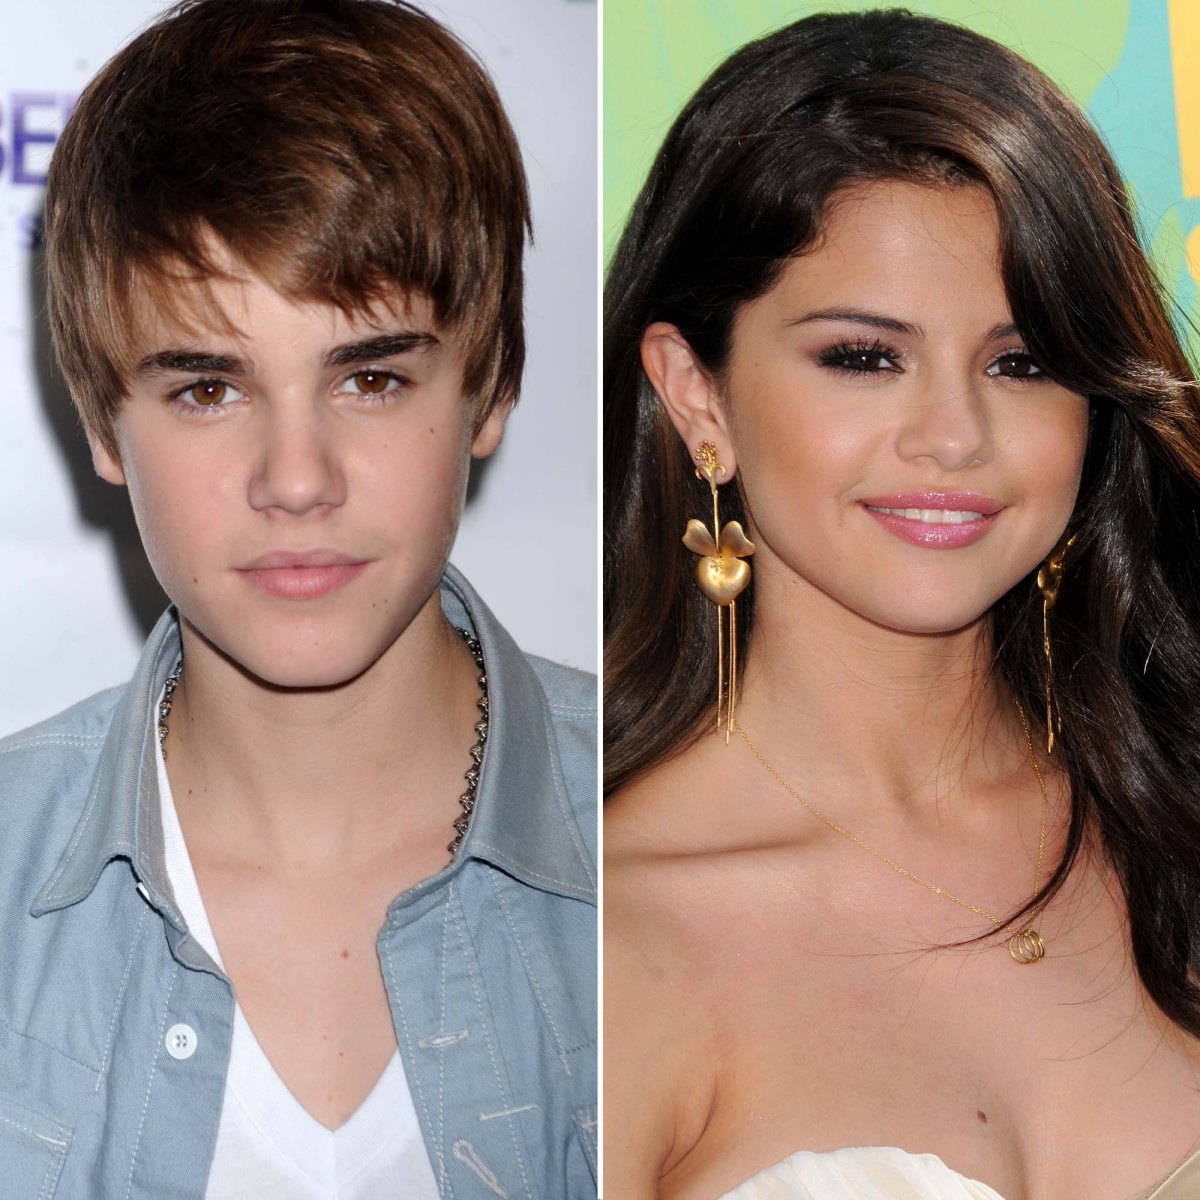 Justin Bieber and Selena Gomez's Relationship: A Look Back